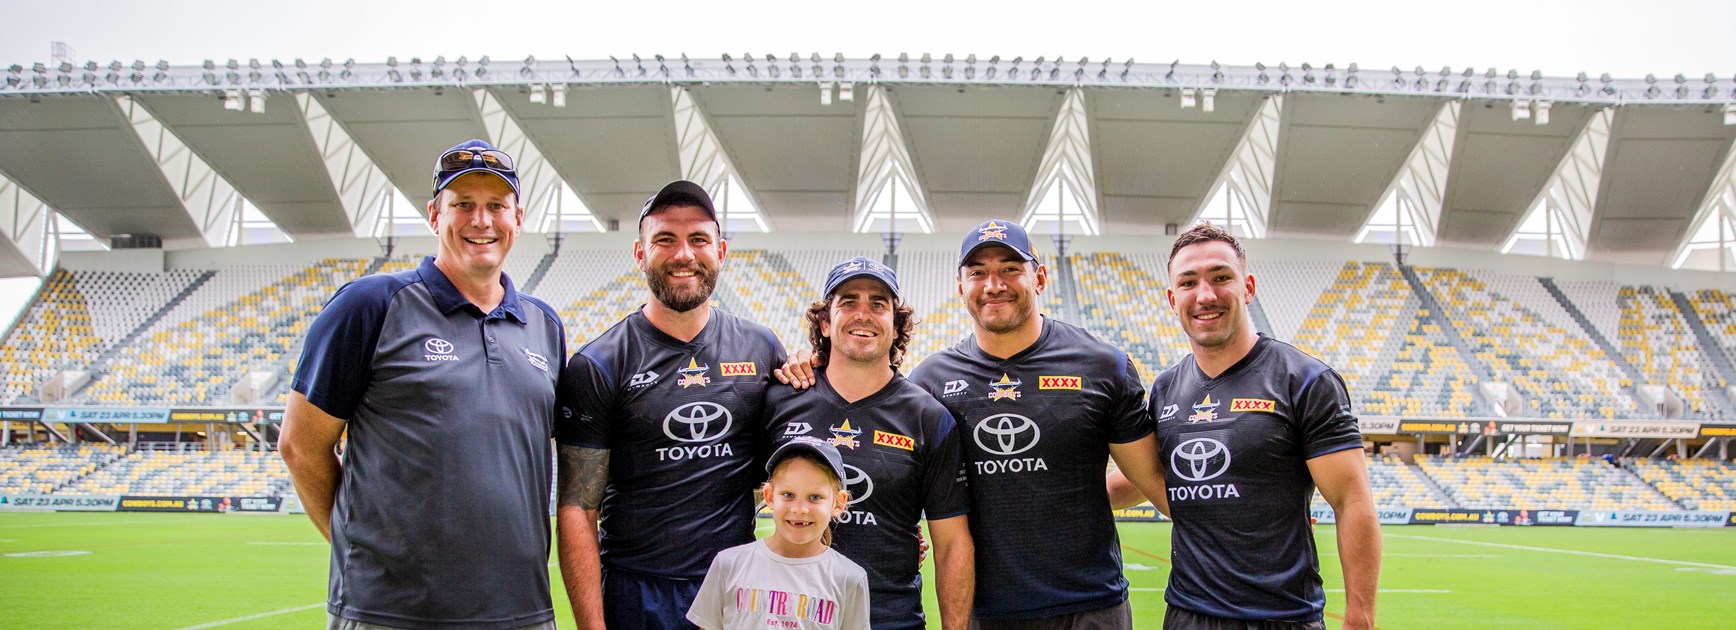 Cowboys pride just as strong on the sidelines for Emerald member